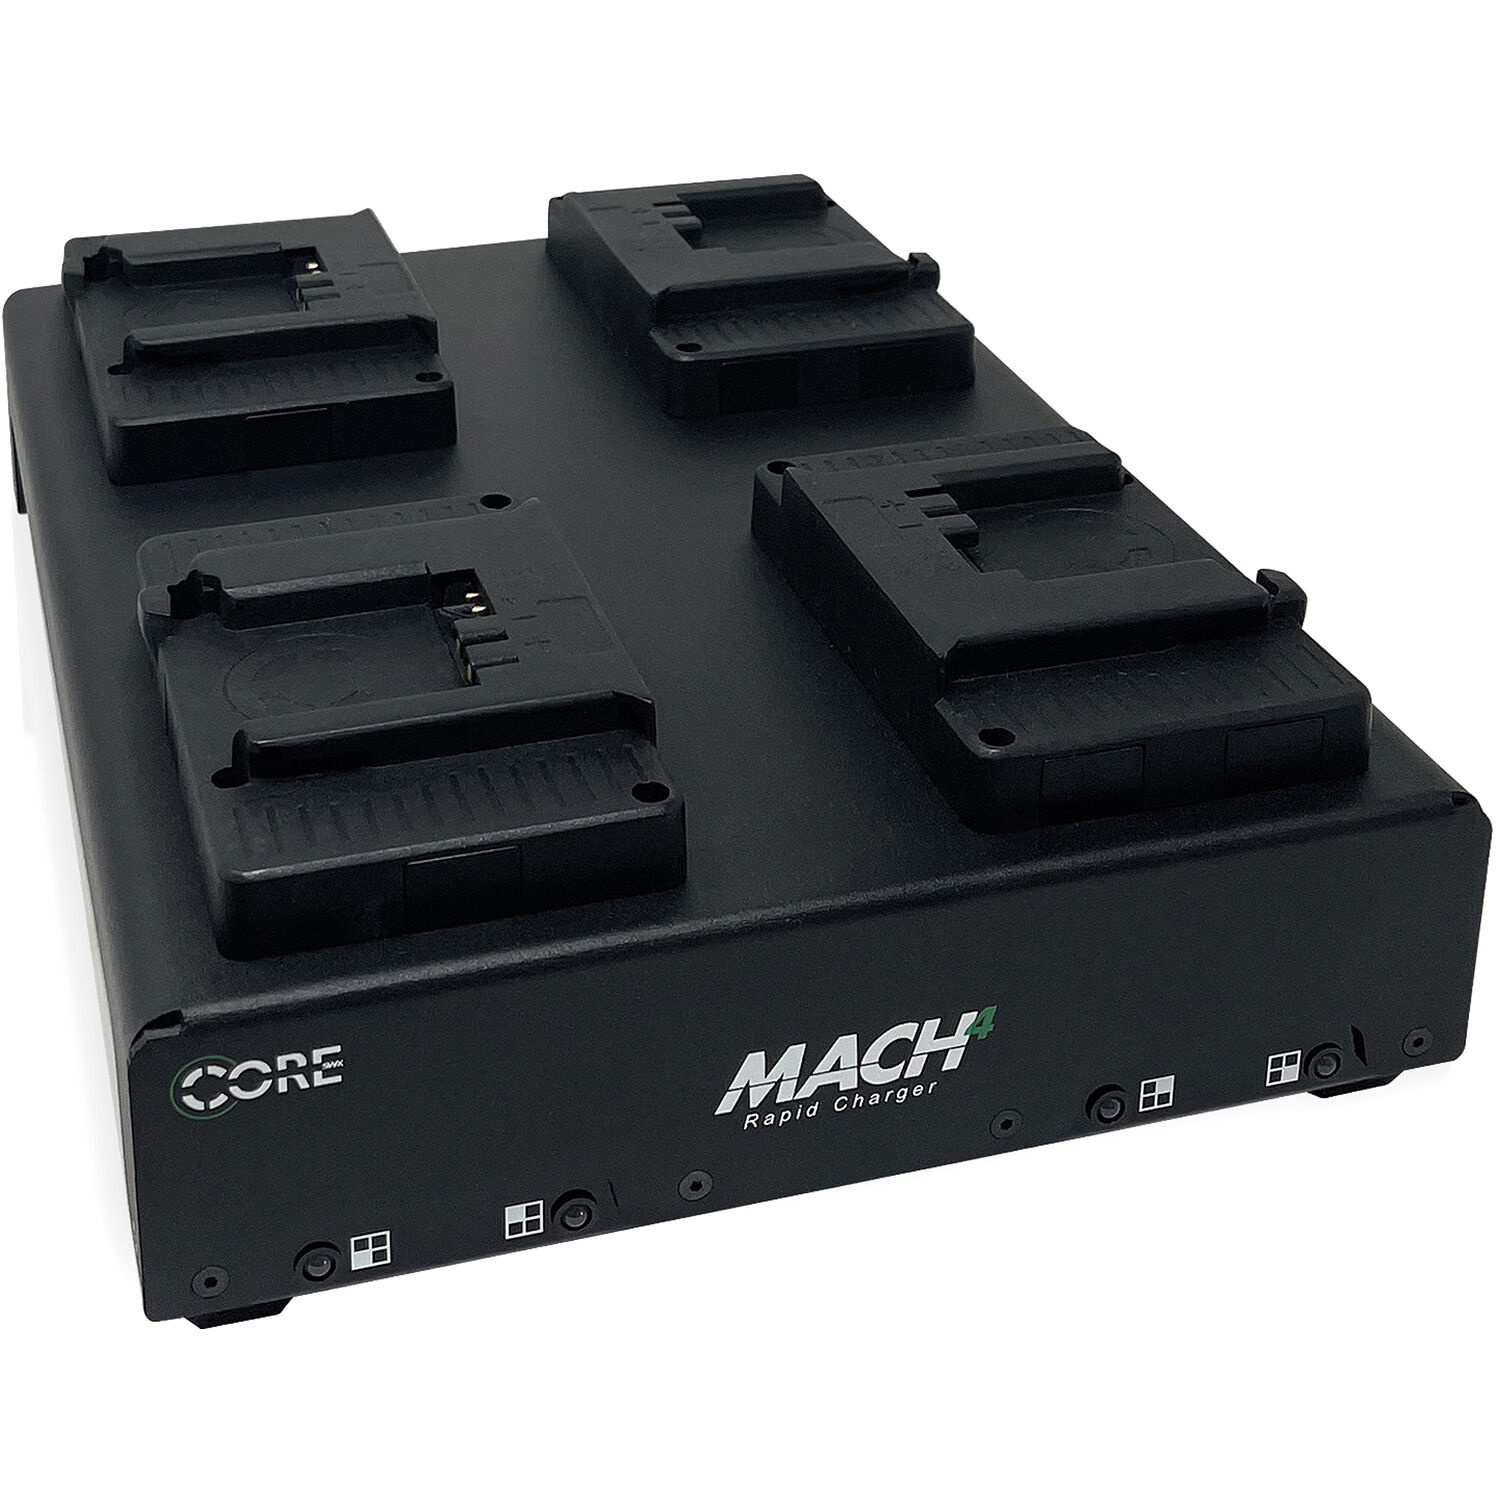 Core SWX Mach4 4-Position Battery Charger (B-Mount)